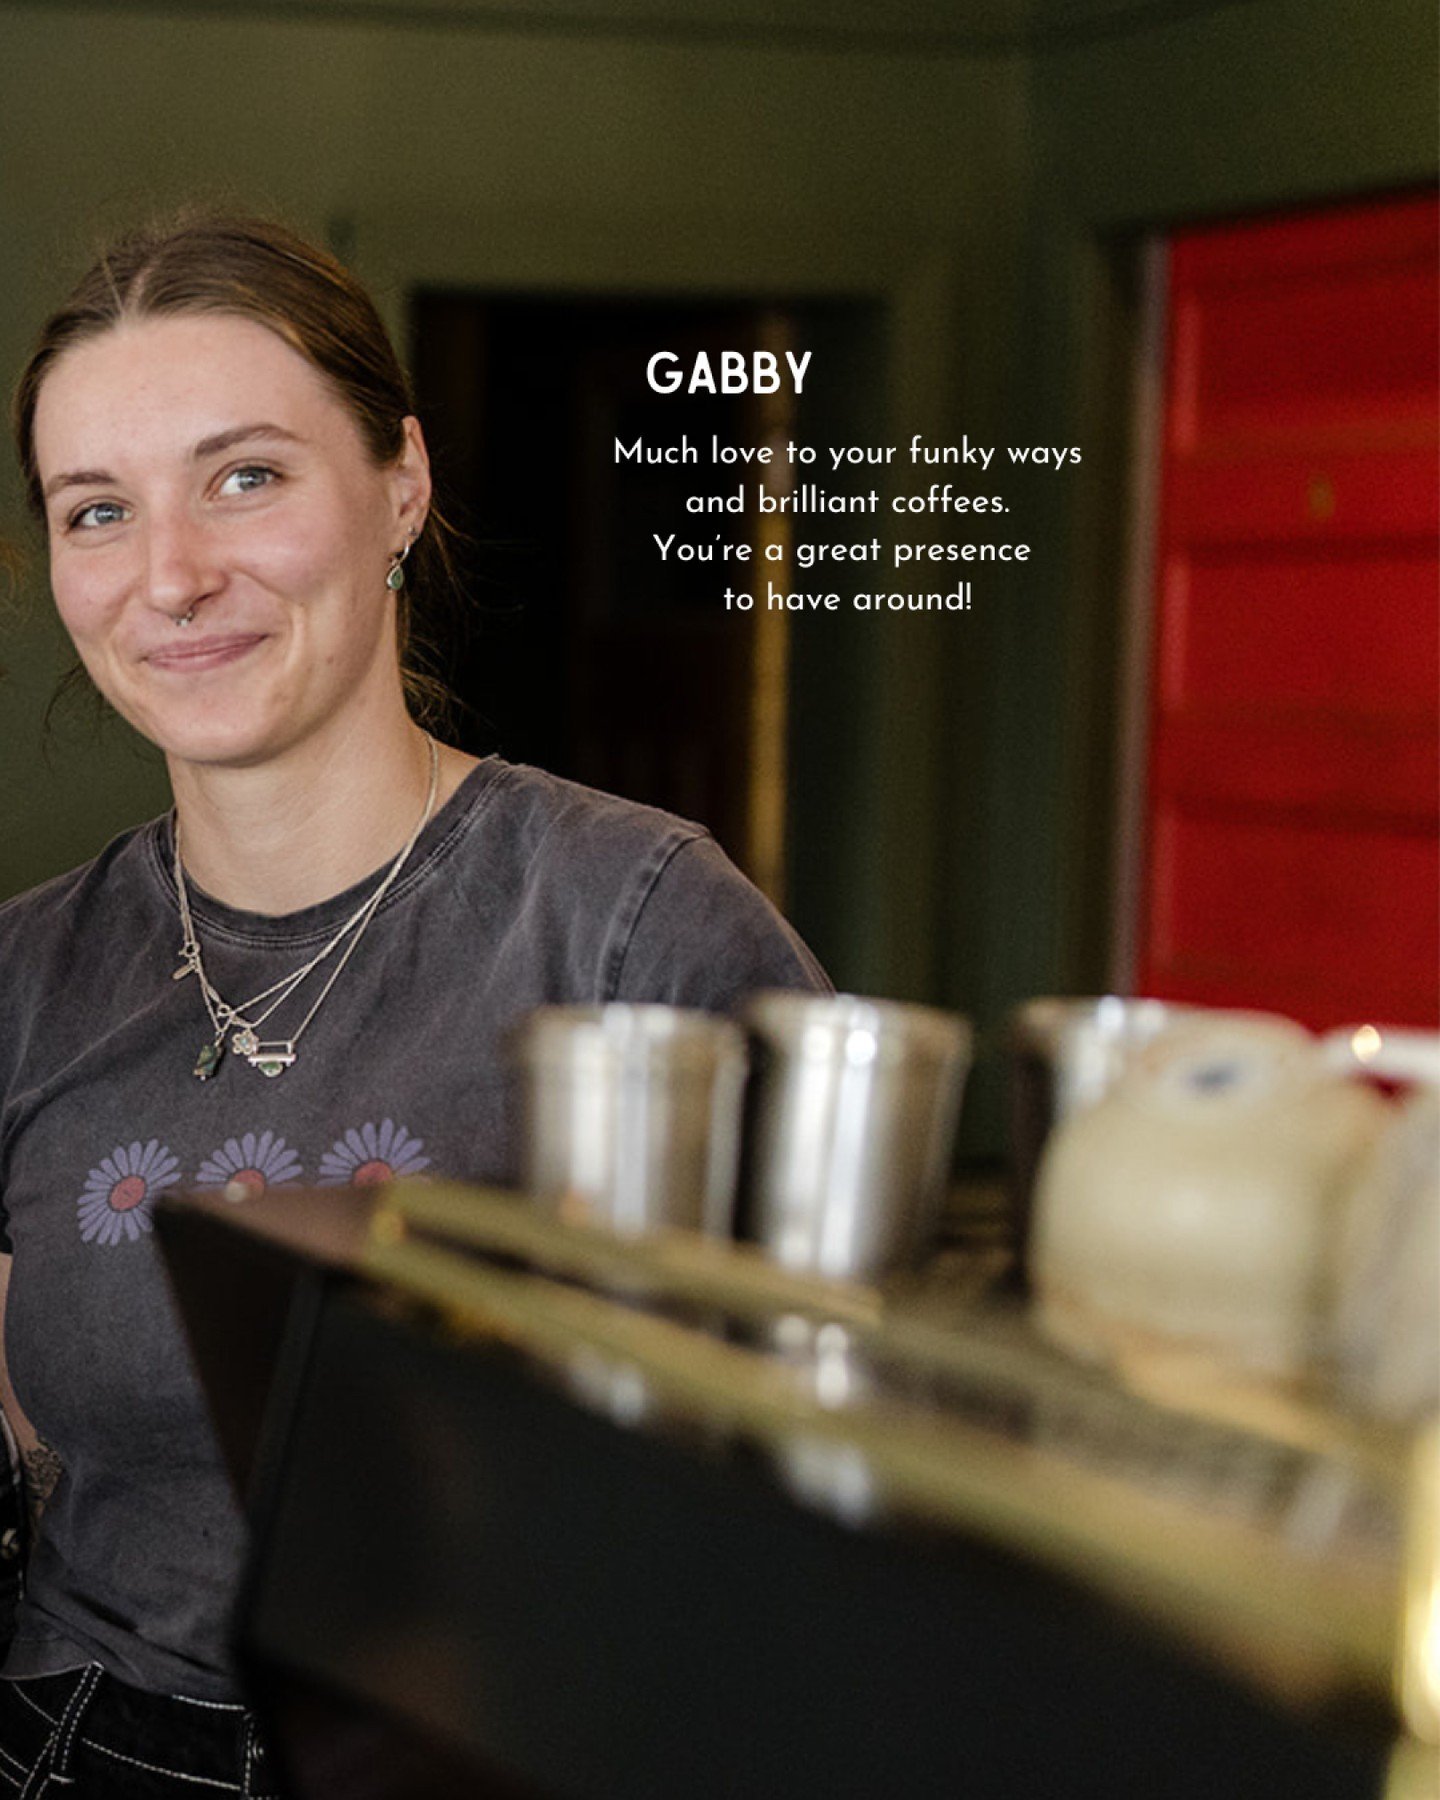 Our lovely barista, Gabby.